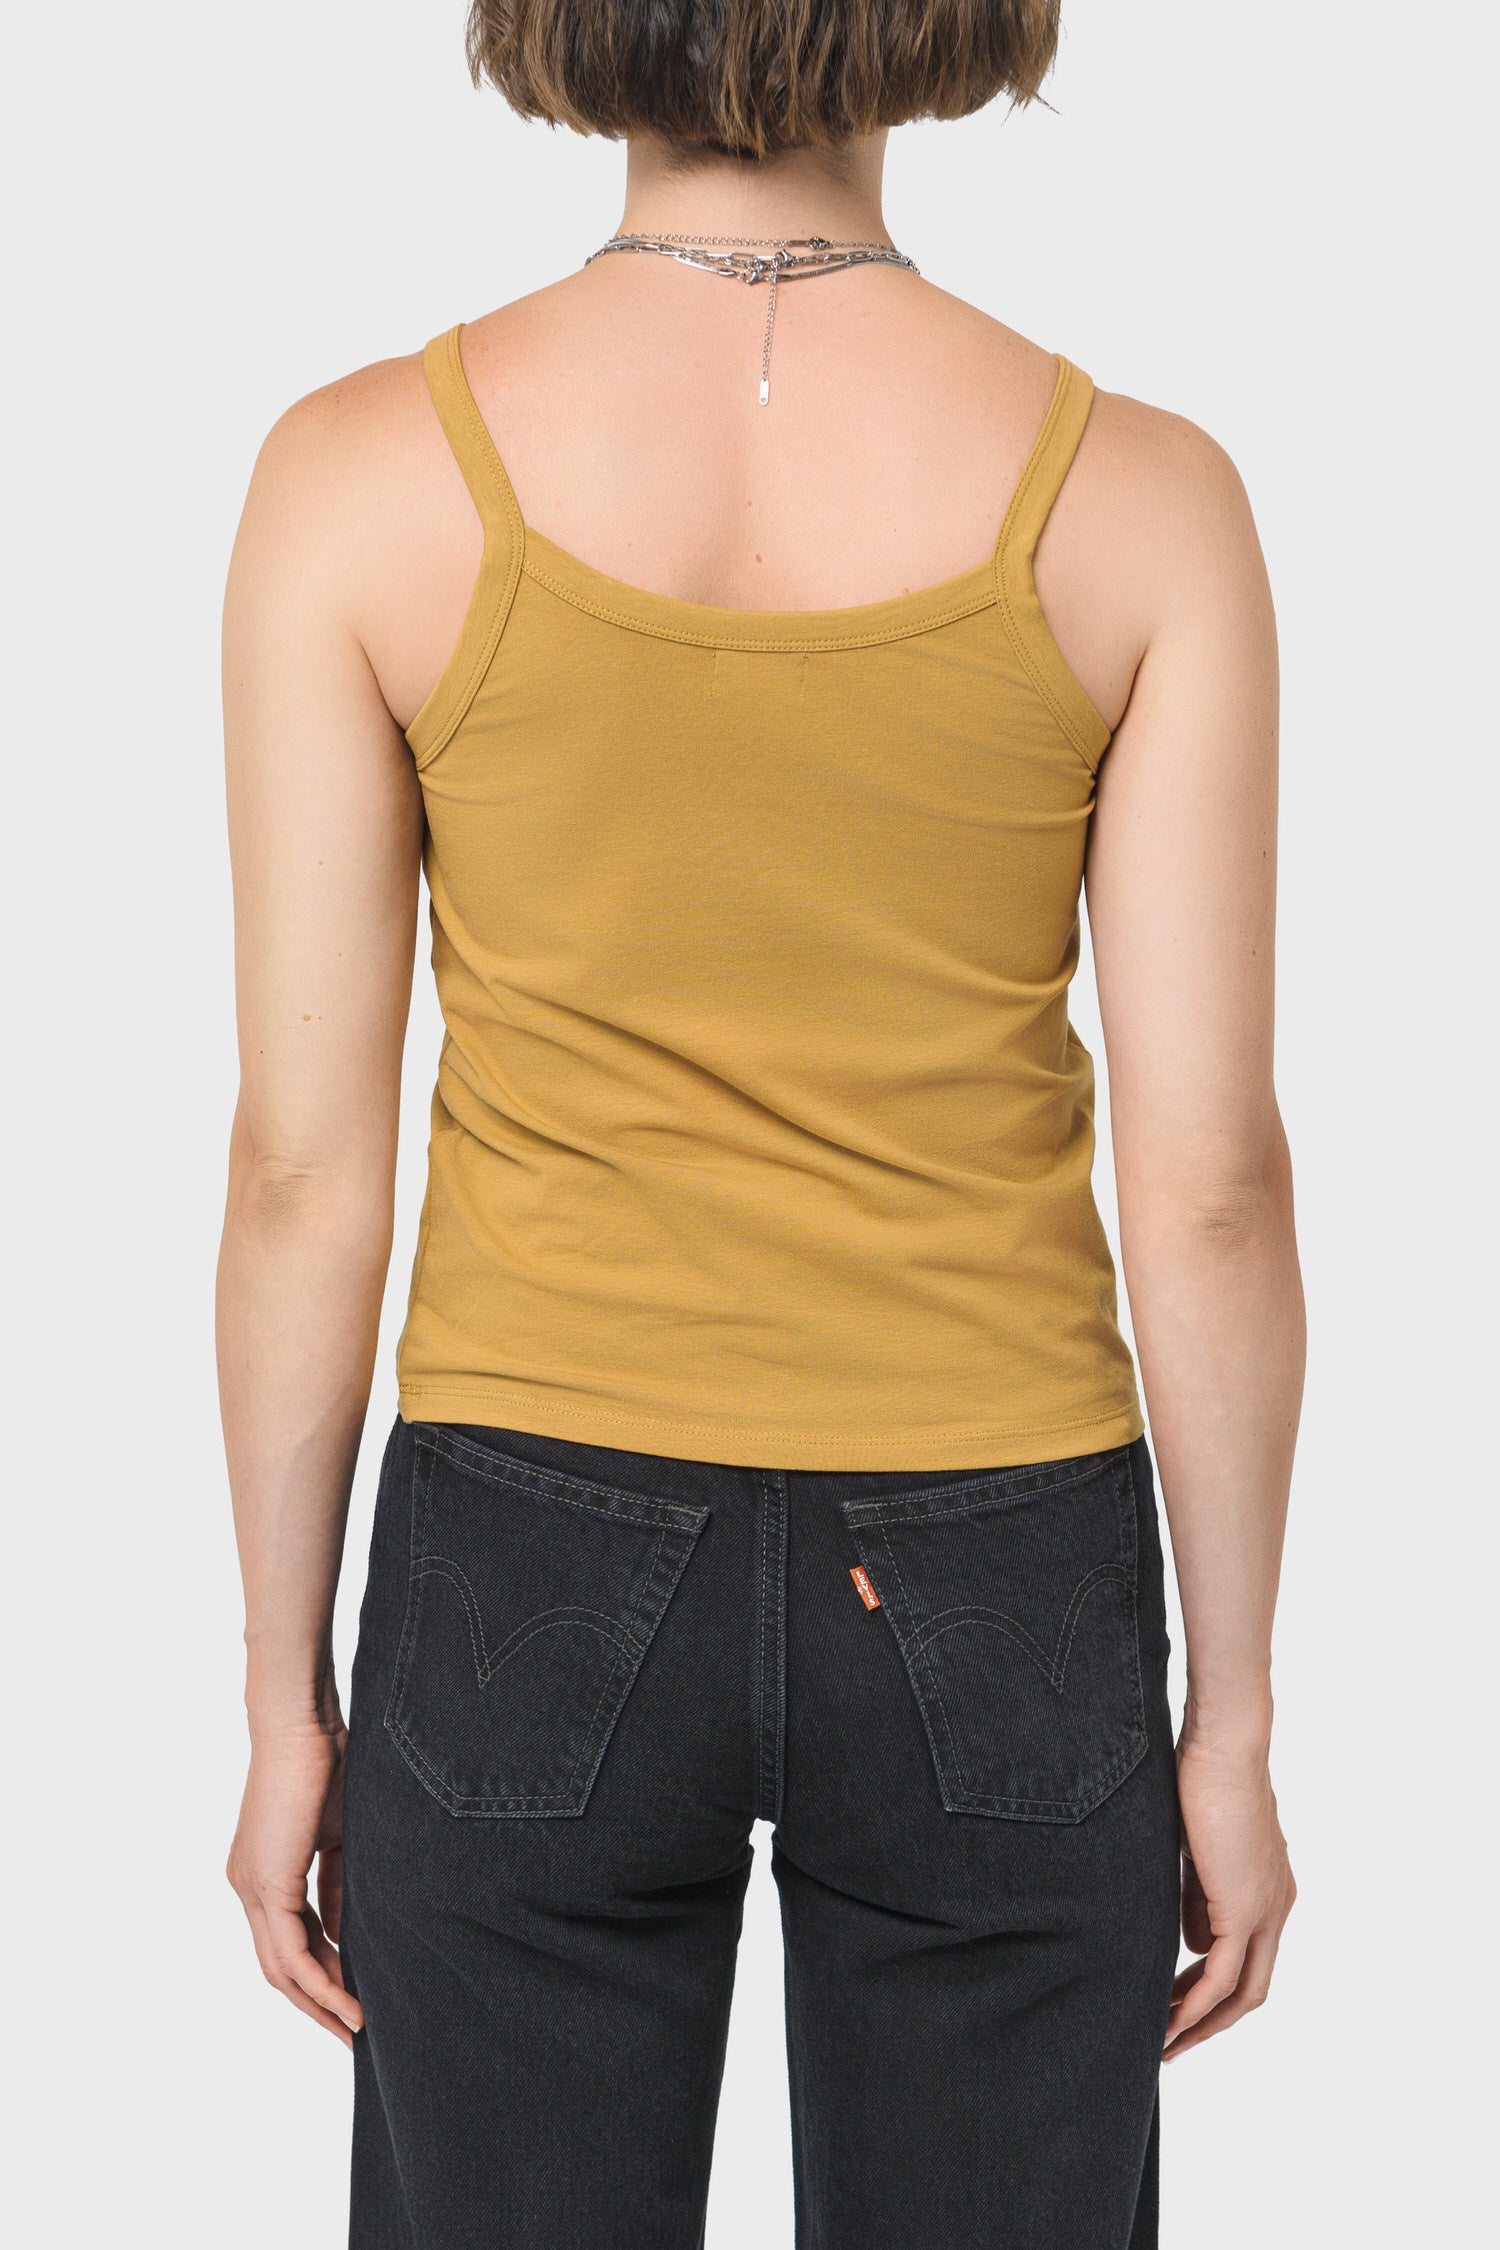 The Mom Tank in Almond